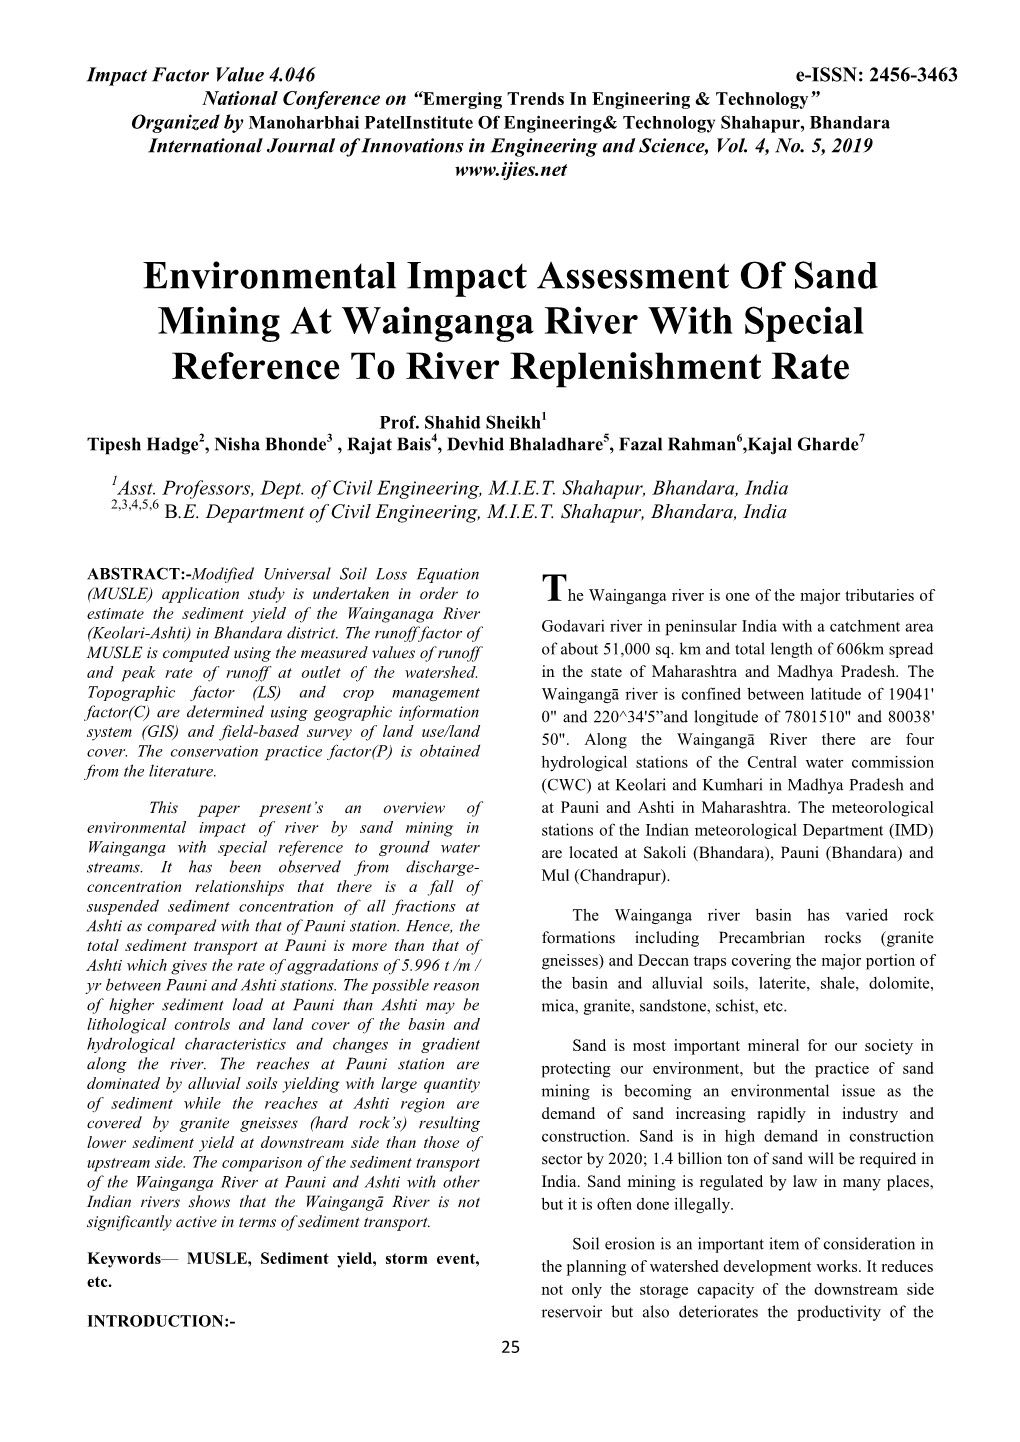 Environmental Impact Assessment of Sand Mining at Wainganga River with Special Reference to River Replenishment Rate